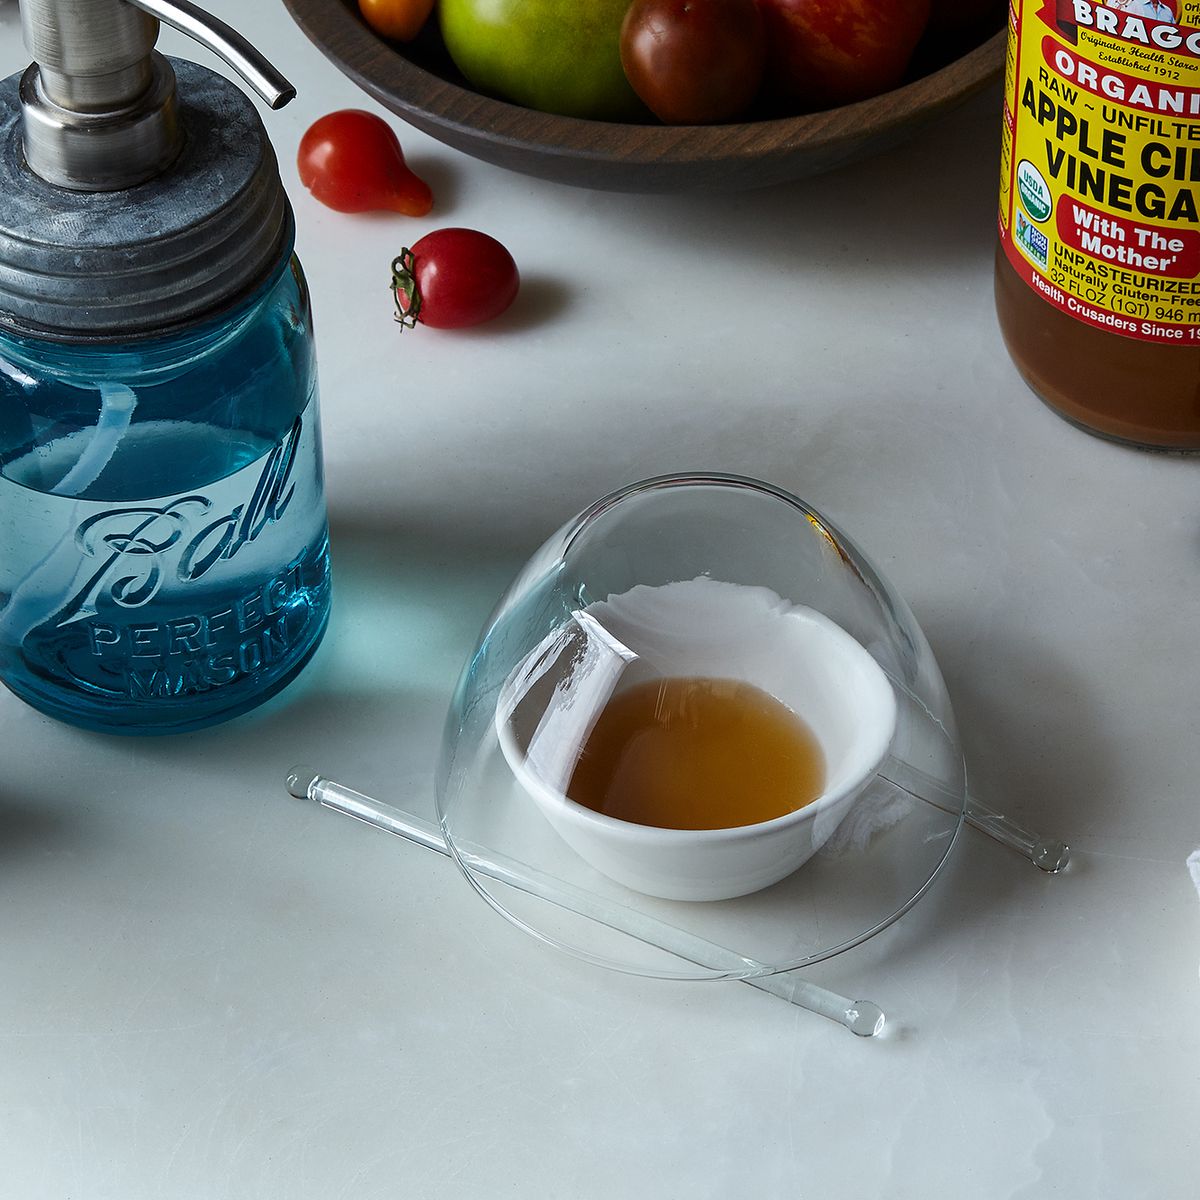 How to Get Rid of Fruit Flies (THE BEST Homemade Fruit Fly Trap